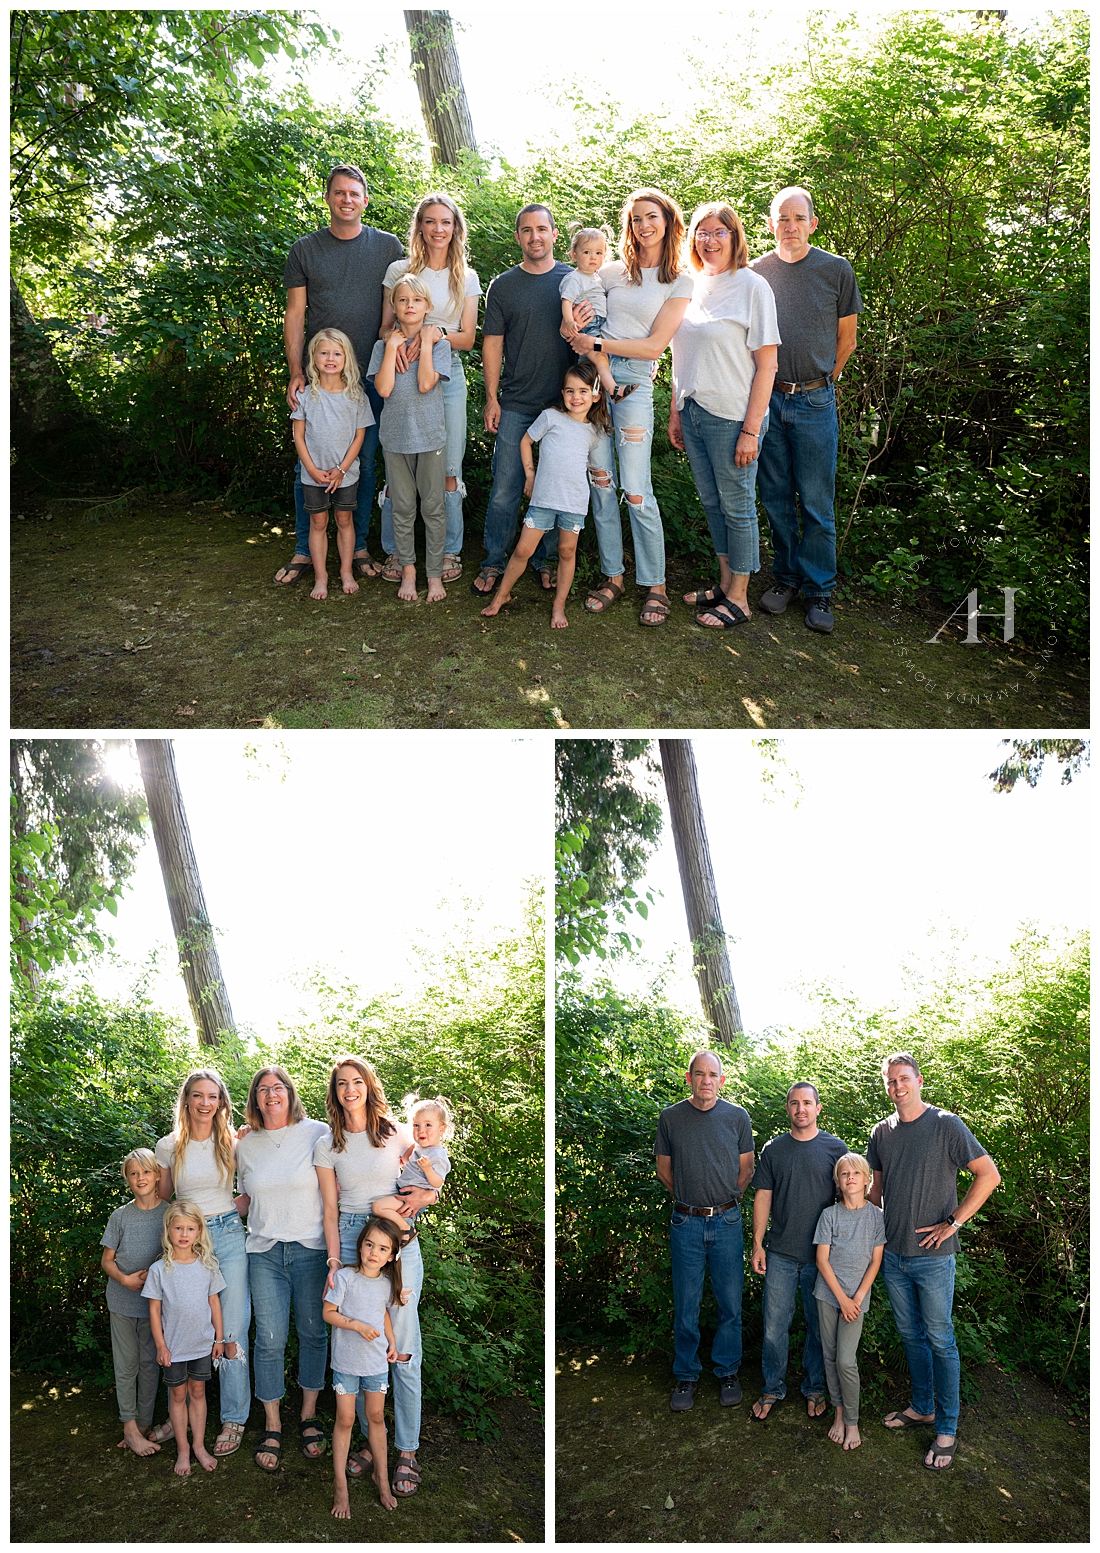 Group Portraits with Multi-Family Layout | PNW Family Photos | Photographed by the Best Tacoma, Washington Family Photographer Amanda Howse Photography